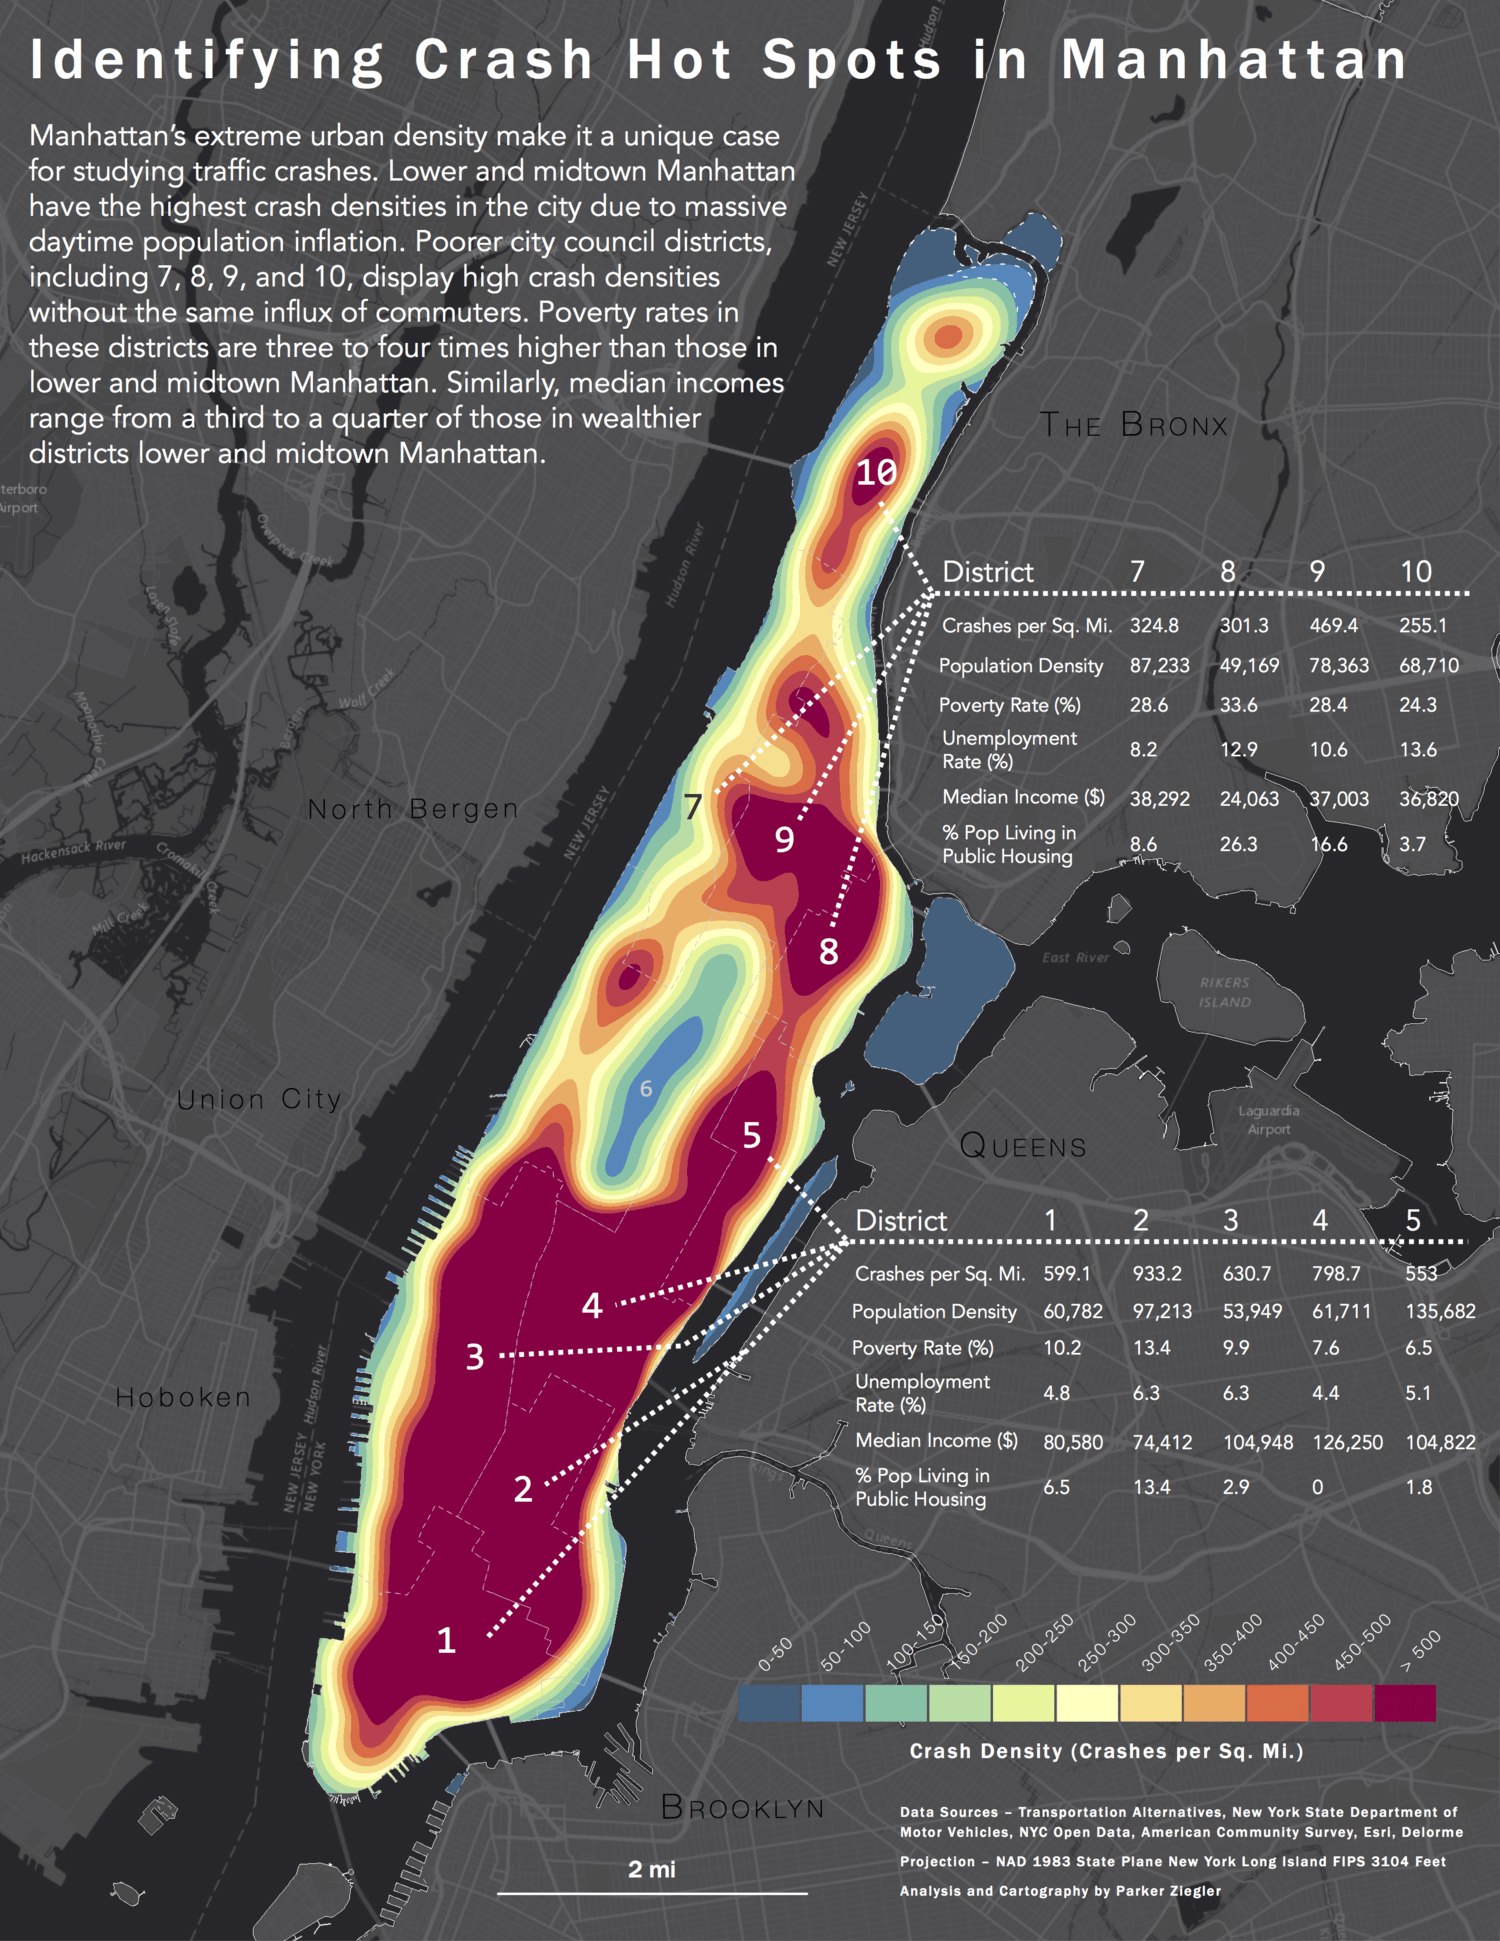 A heat map of traffic crashes in Manhattan, New York City between 2013 and 2015.